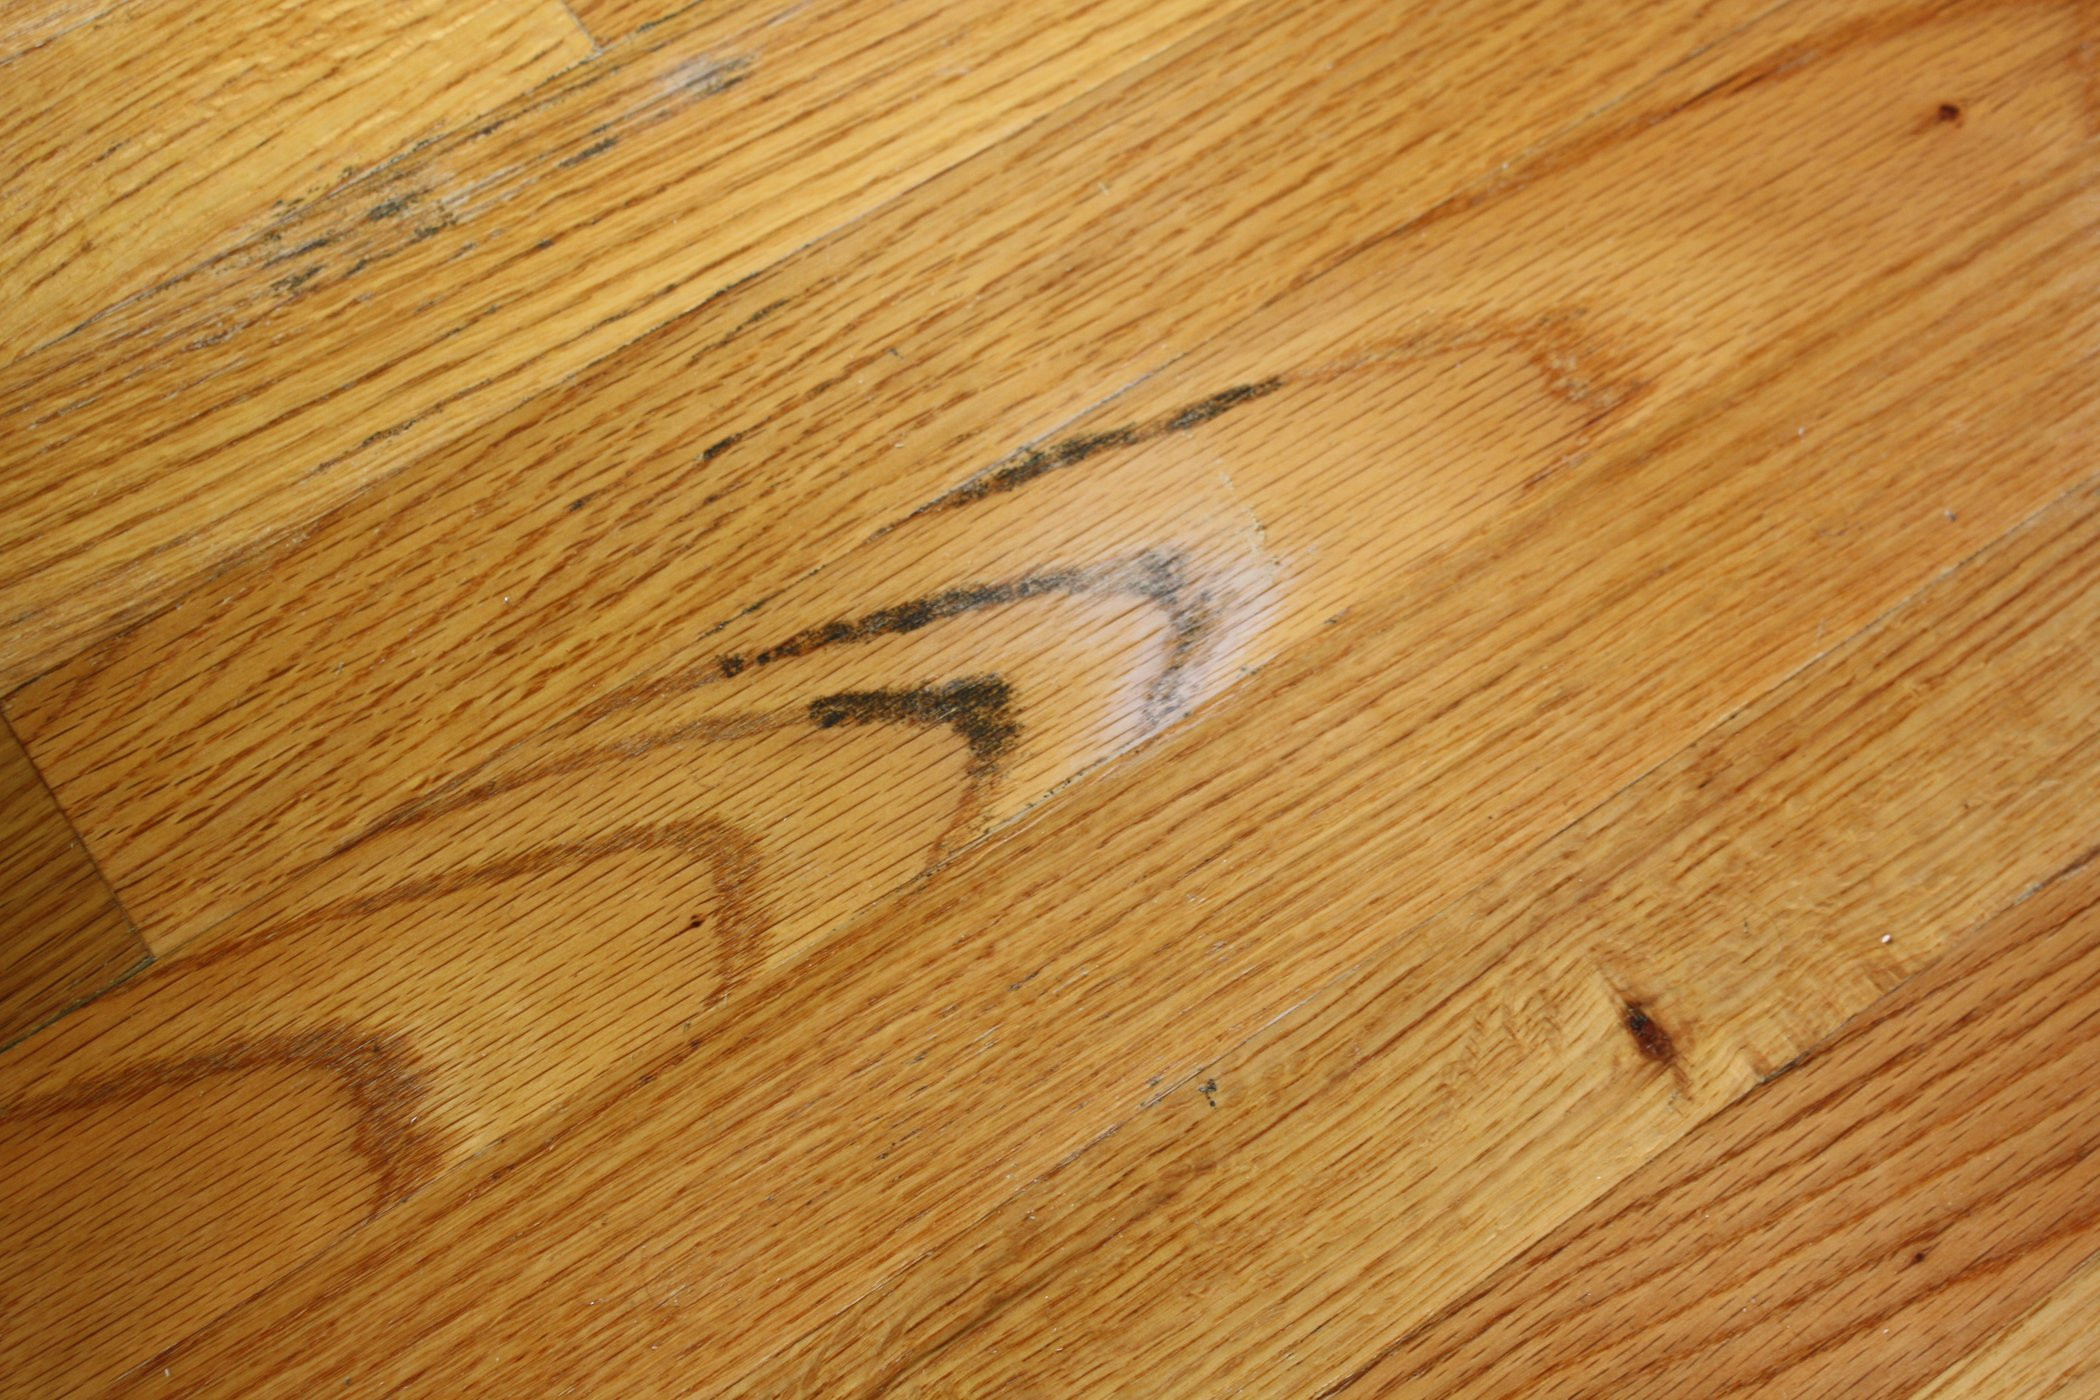 hardwood flooring online canada of how to clean mold from a wood floor 4 steps pertaining to fylcmqyg7dyp6ds